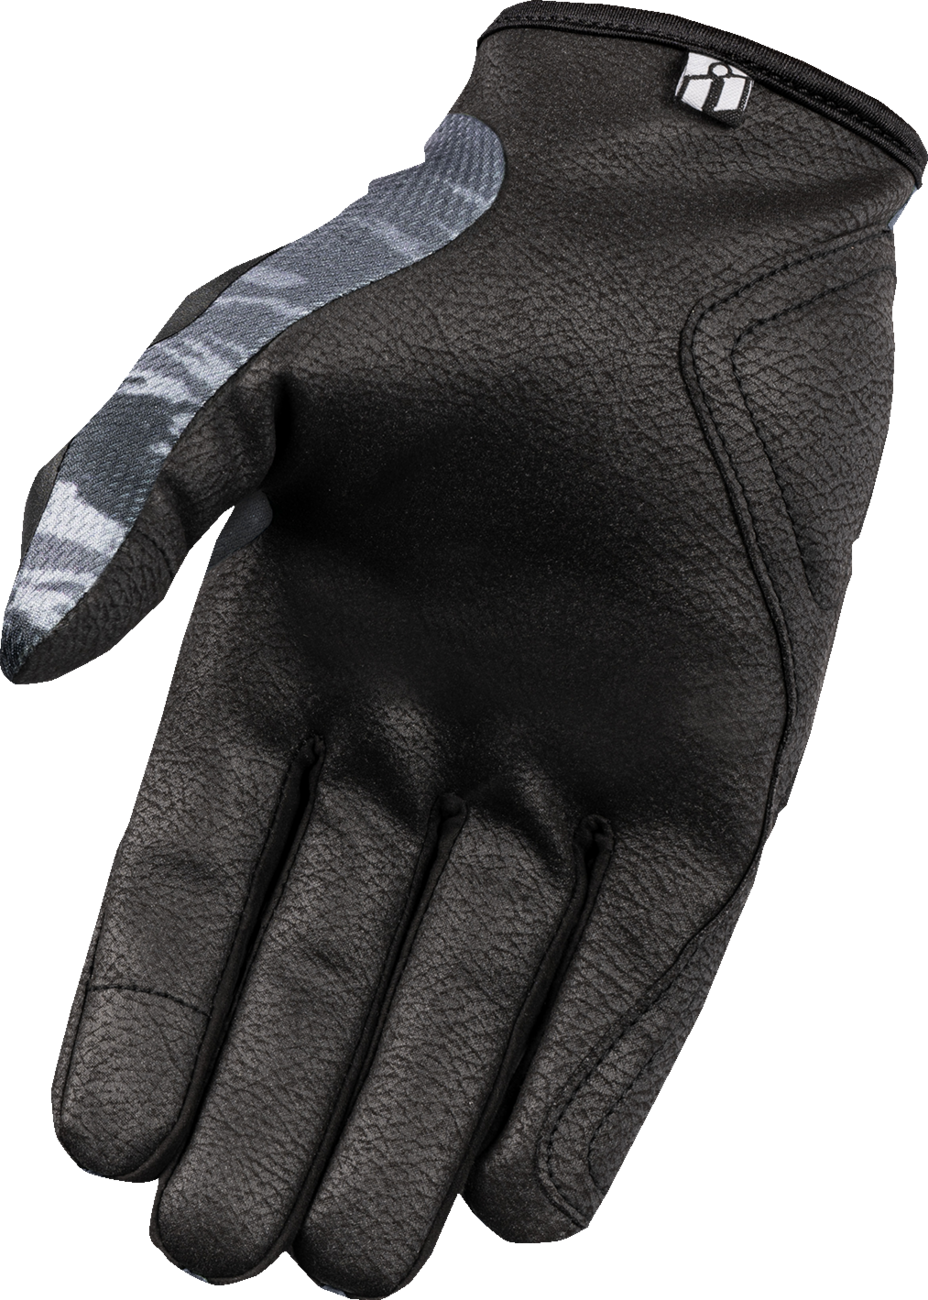 ICON Hooligan™ Tiger's Blood Gloves - Gray - Small 3301-4629